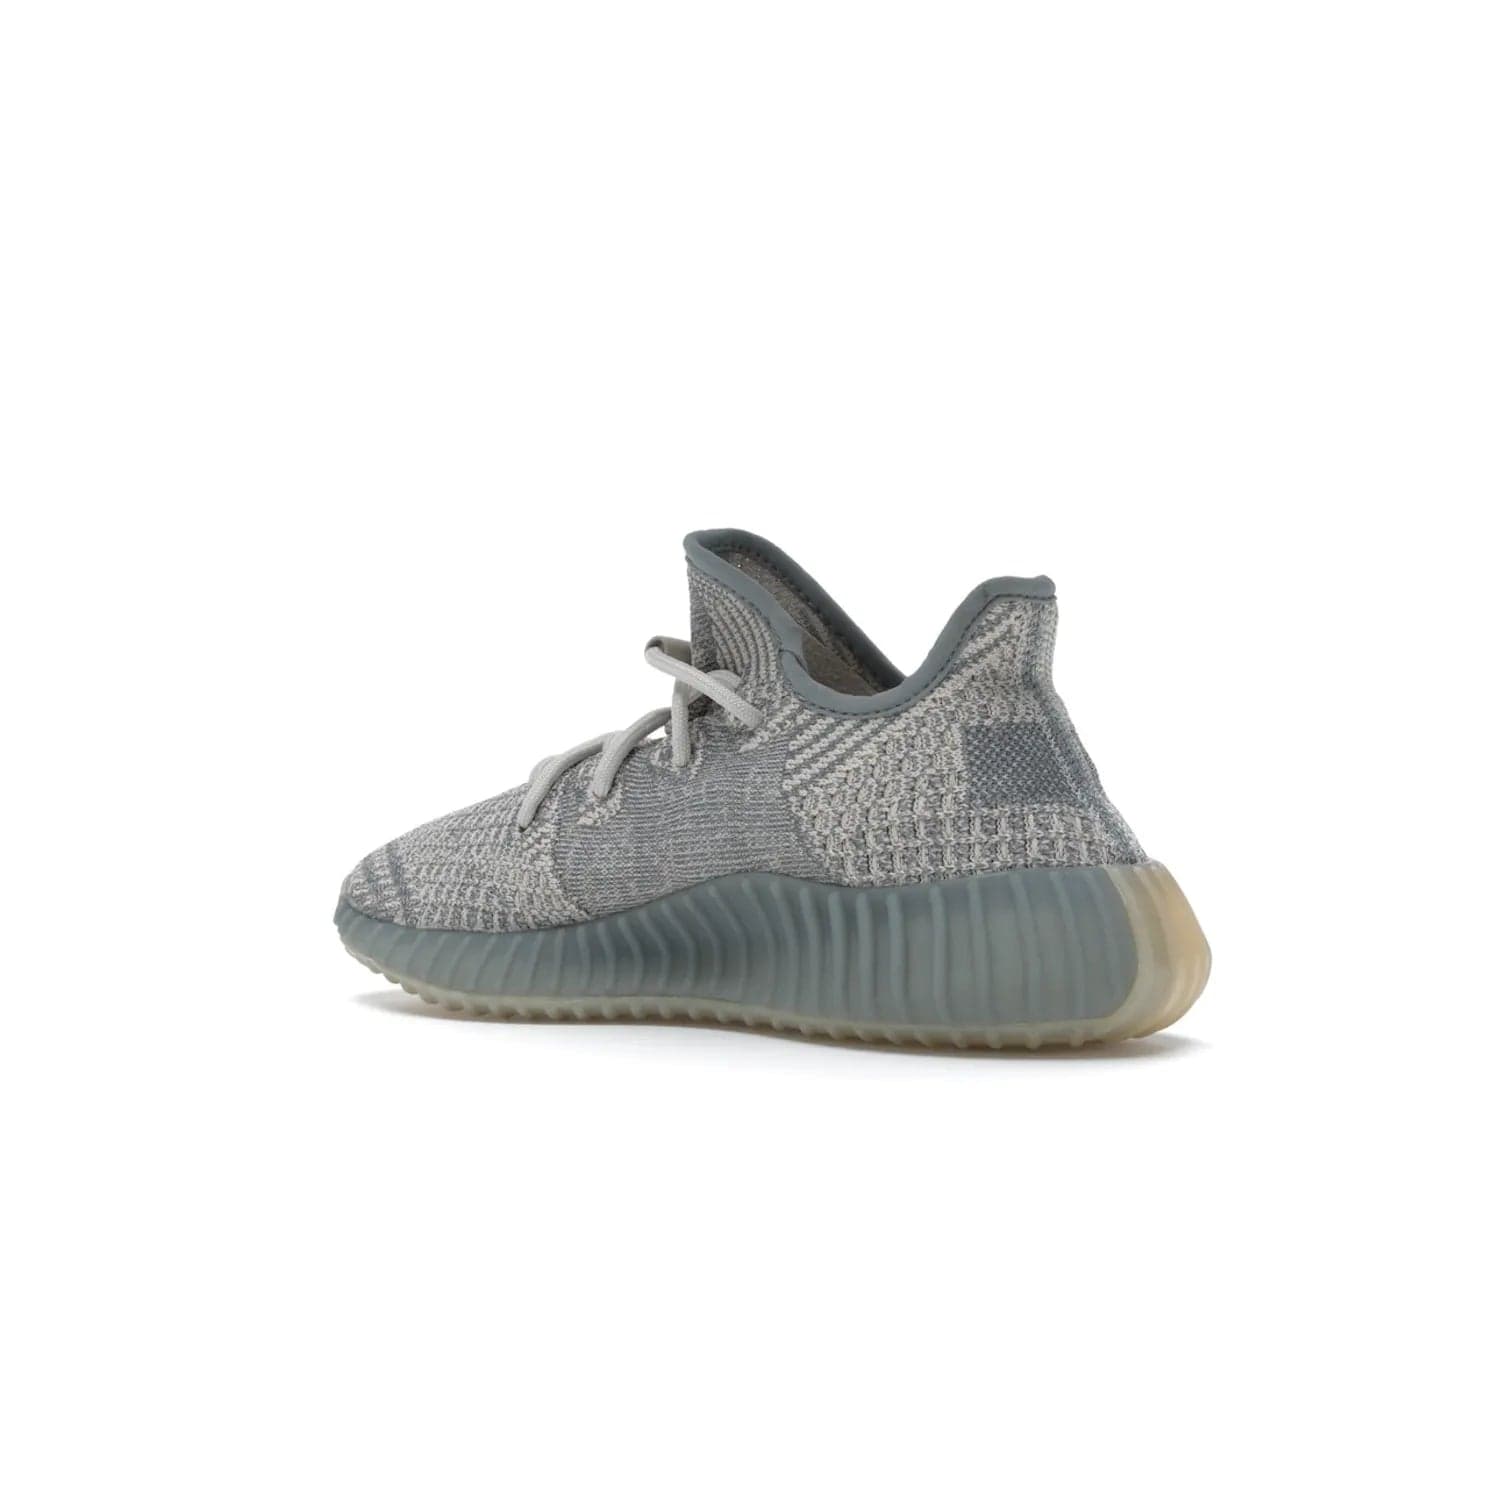 adidas Yeezy Boost 350 V2 Israfil - Image 23 - Only at www.BallersClubKickz.com - The adidas Yeezy Boost 350 V2 Israfil provides a unique style with a triple colorway and multi-colored threads. Featuring BOOST cushioning in a translucent midsole, this must-have sneaker drops in August 2020.